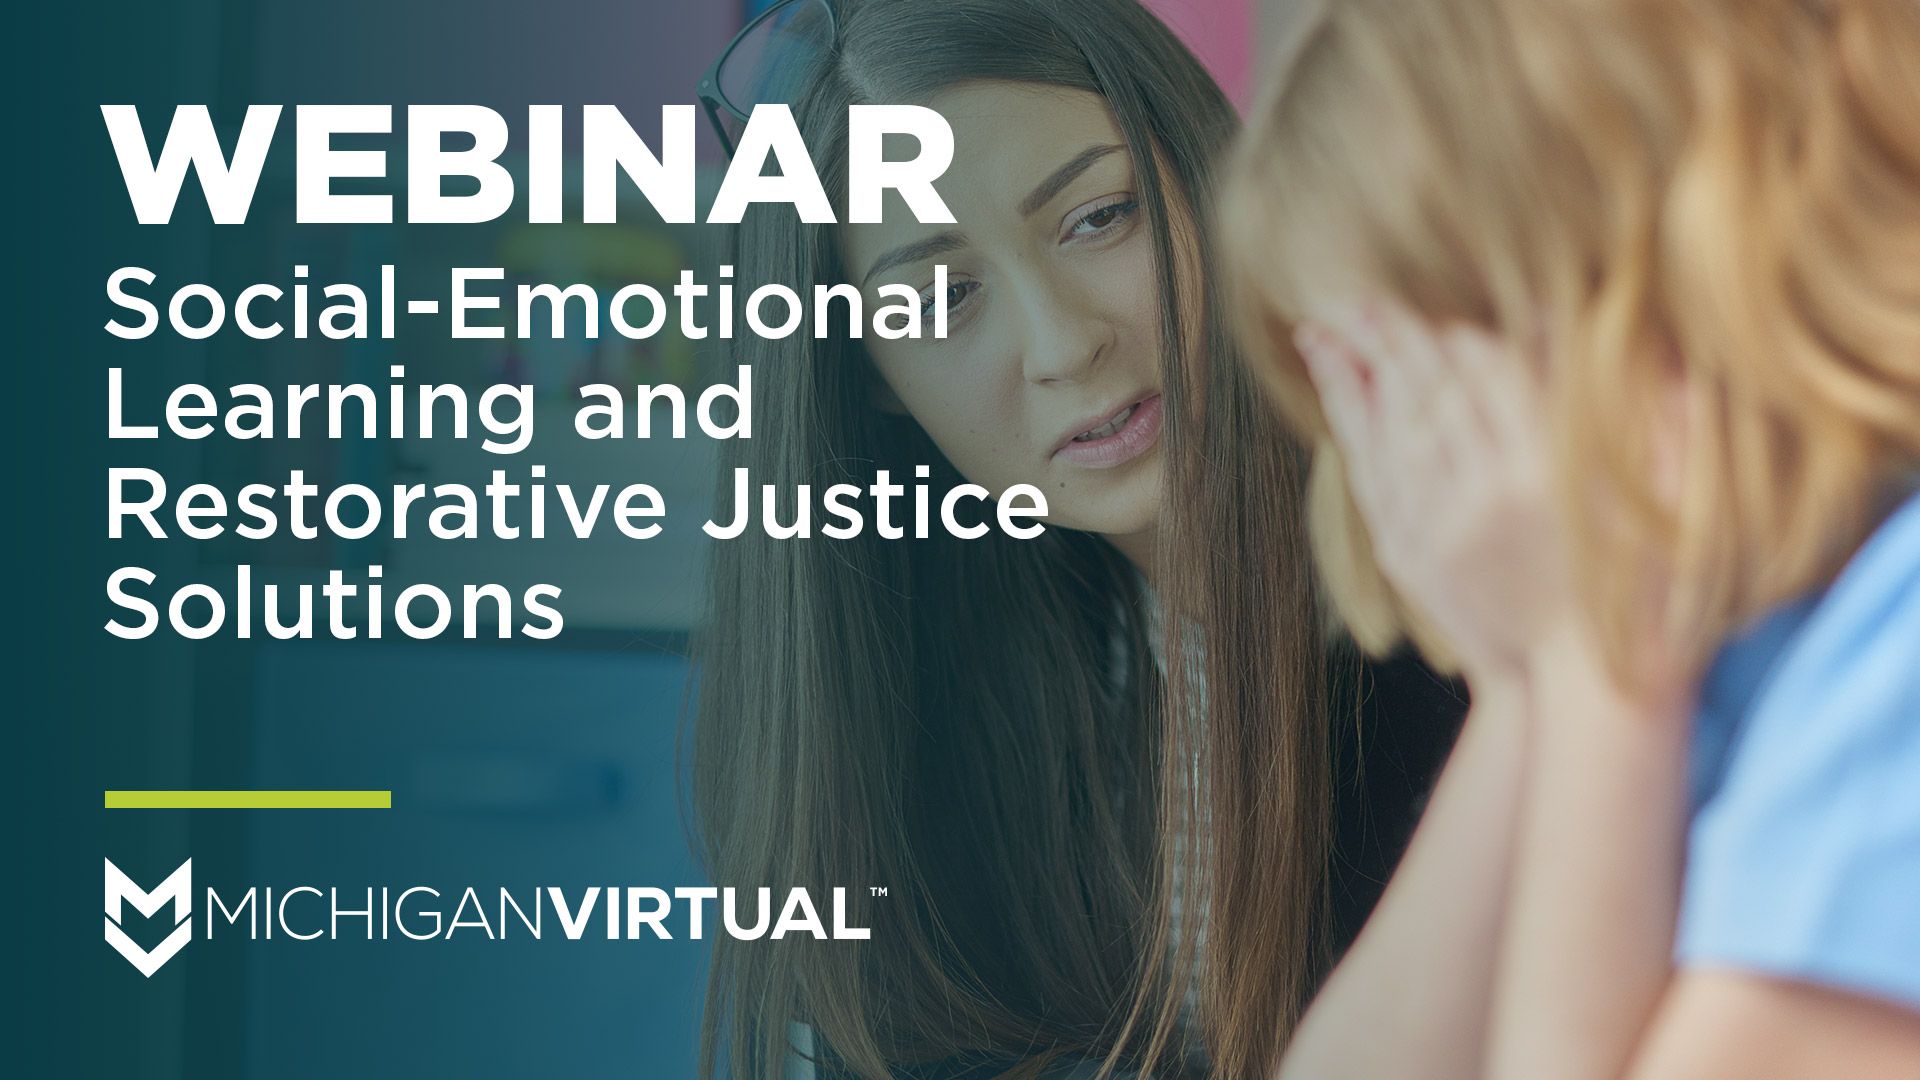 Social-Emotional Learning and Restorative Justice Solutions